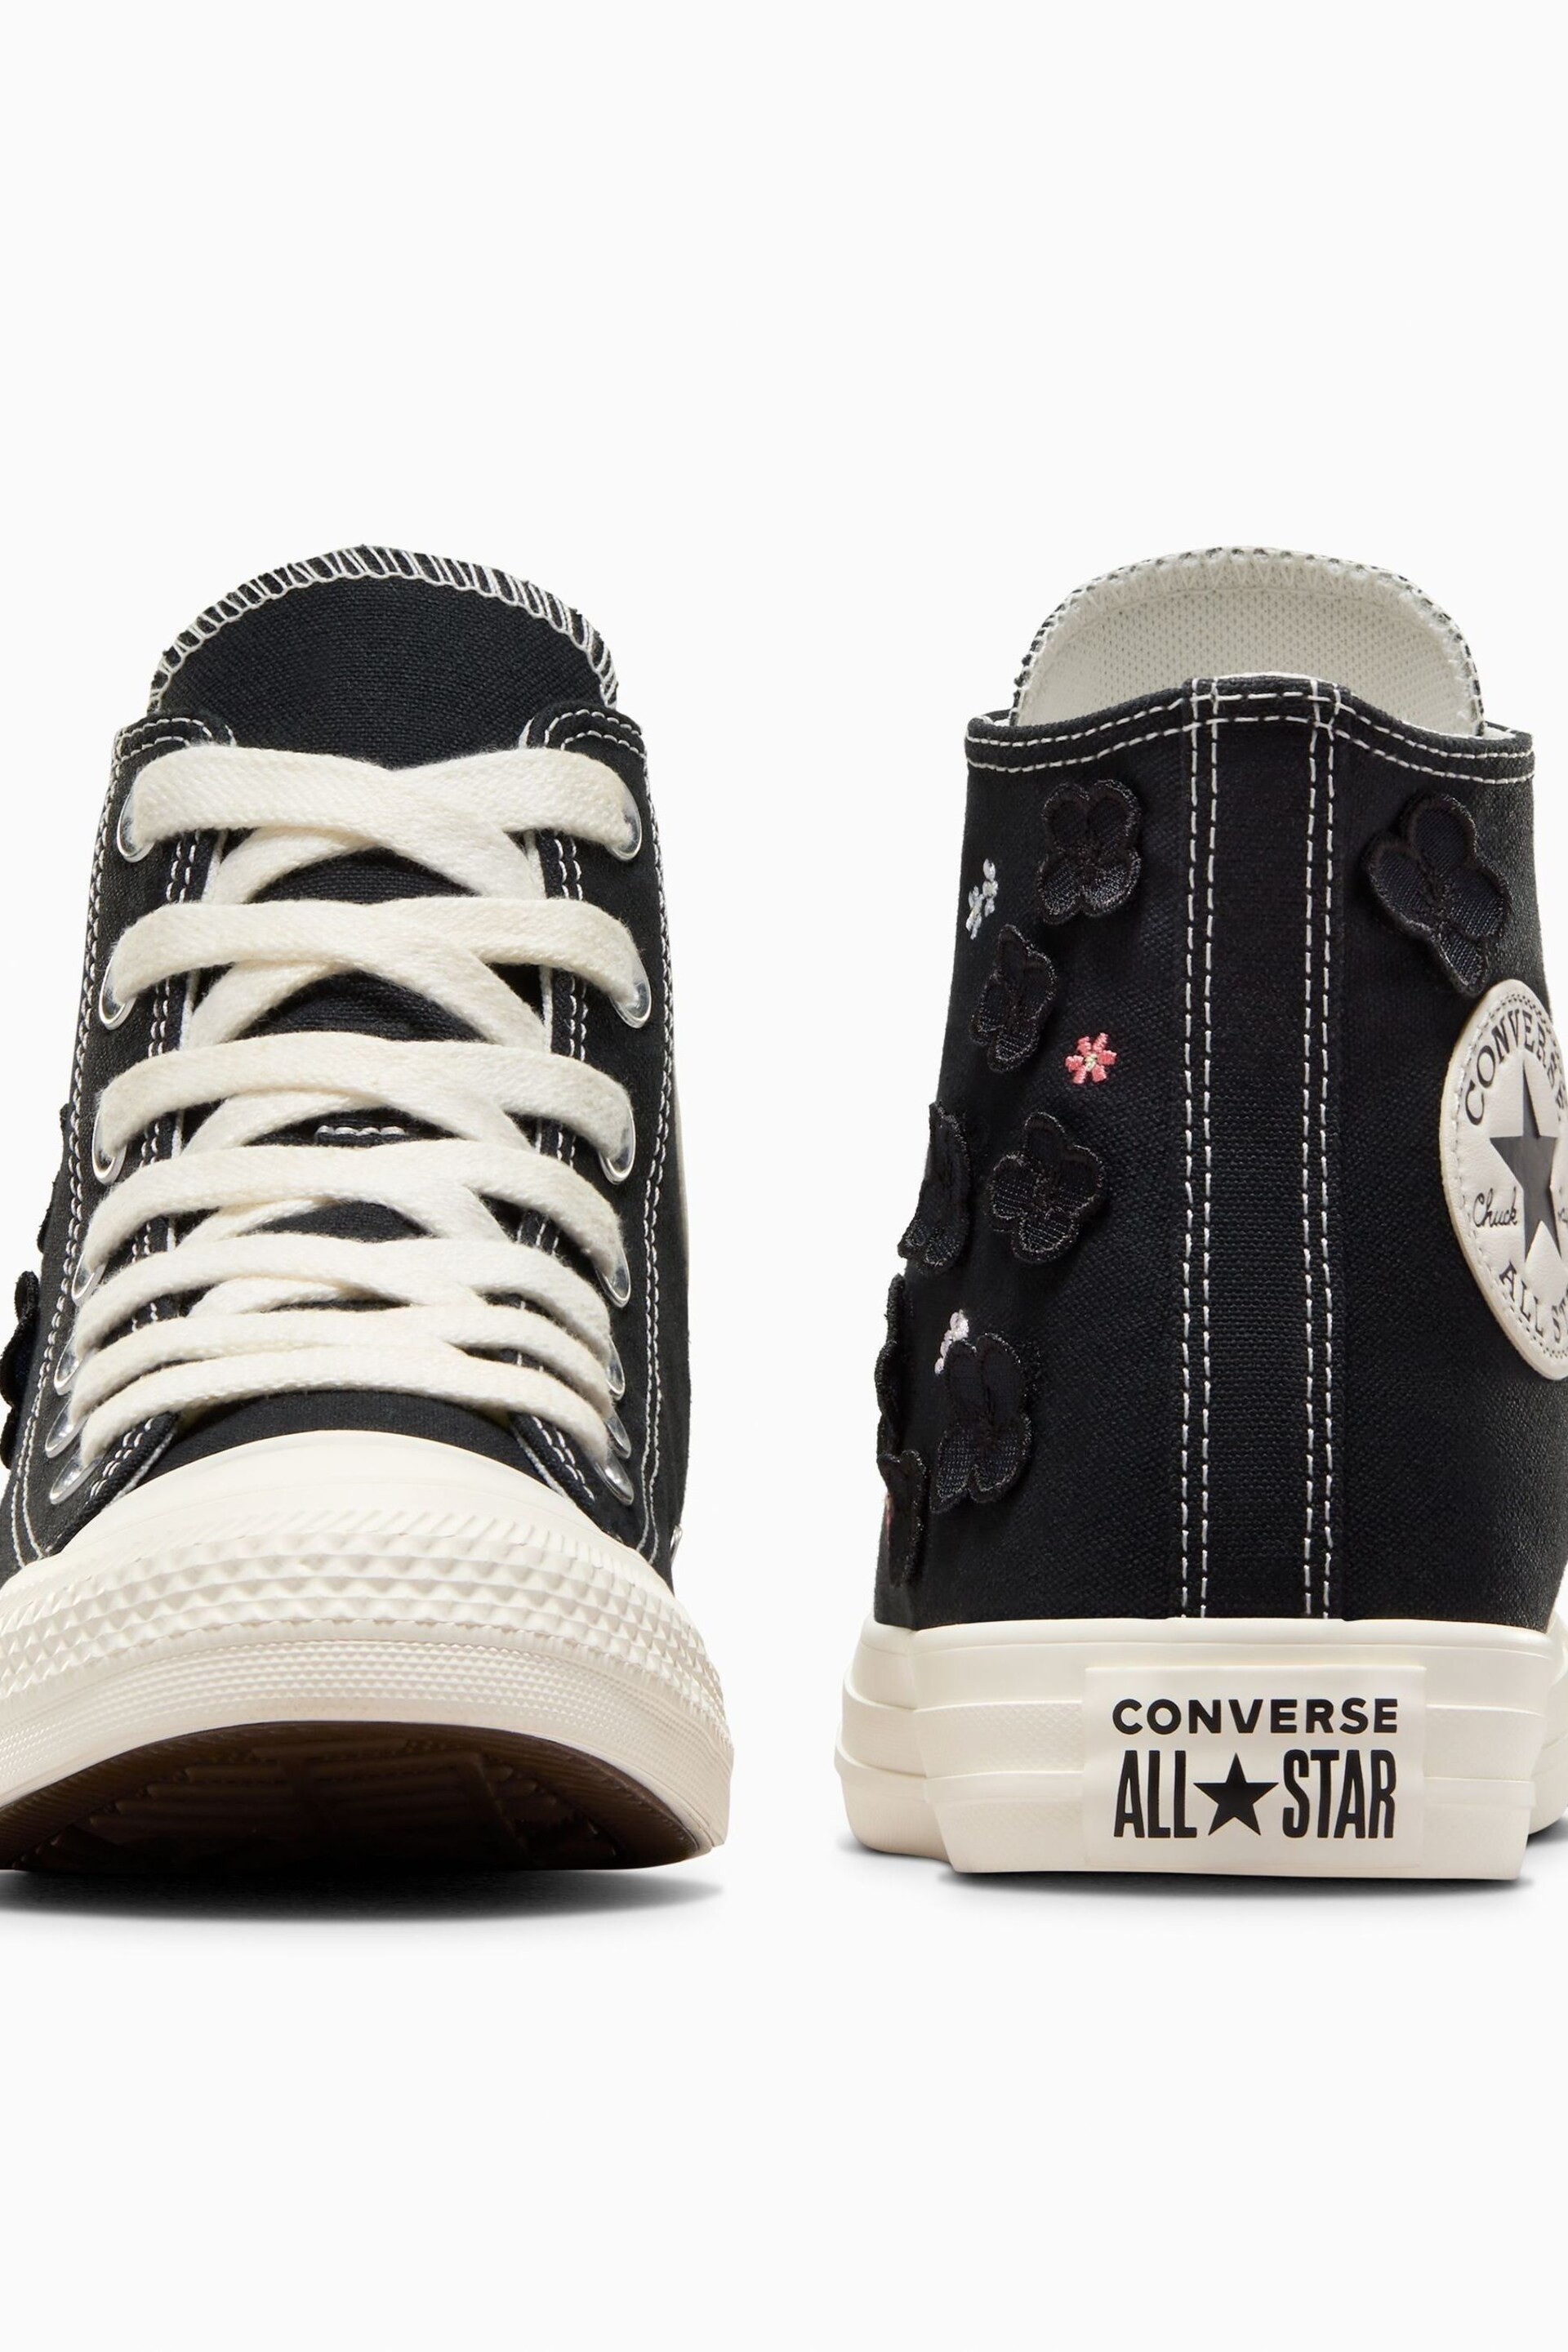 Converse Black Floral Embroidered High Top Trainers - Image 10 of 13